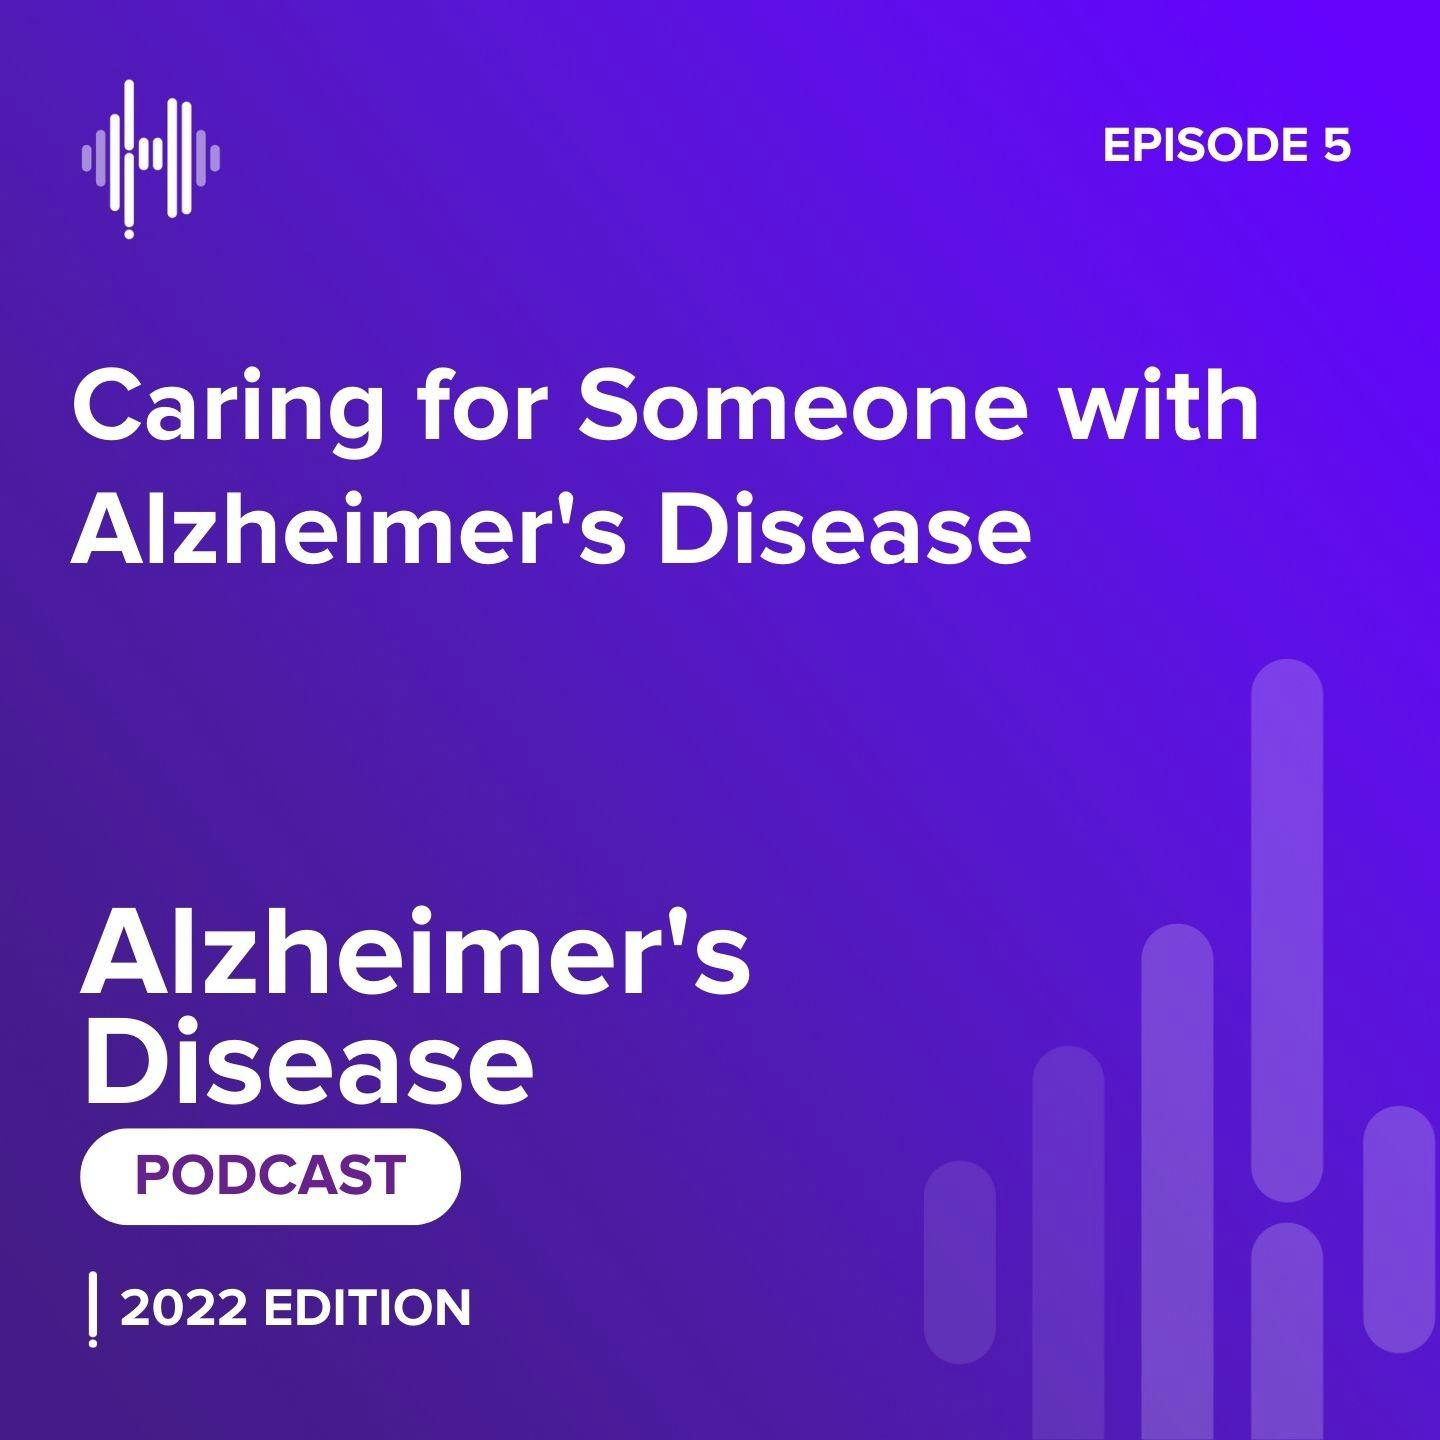 Ep 6: Caring for Someone with Alzheimer's Disease